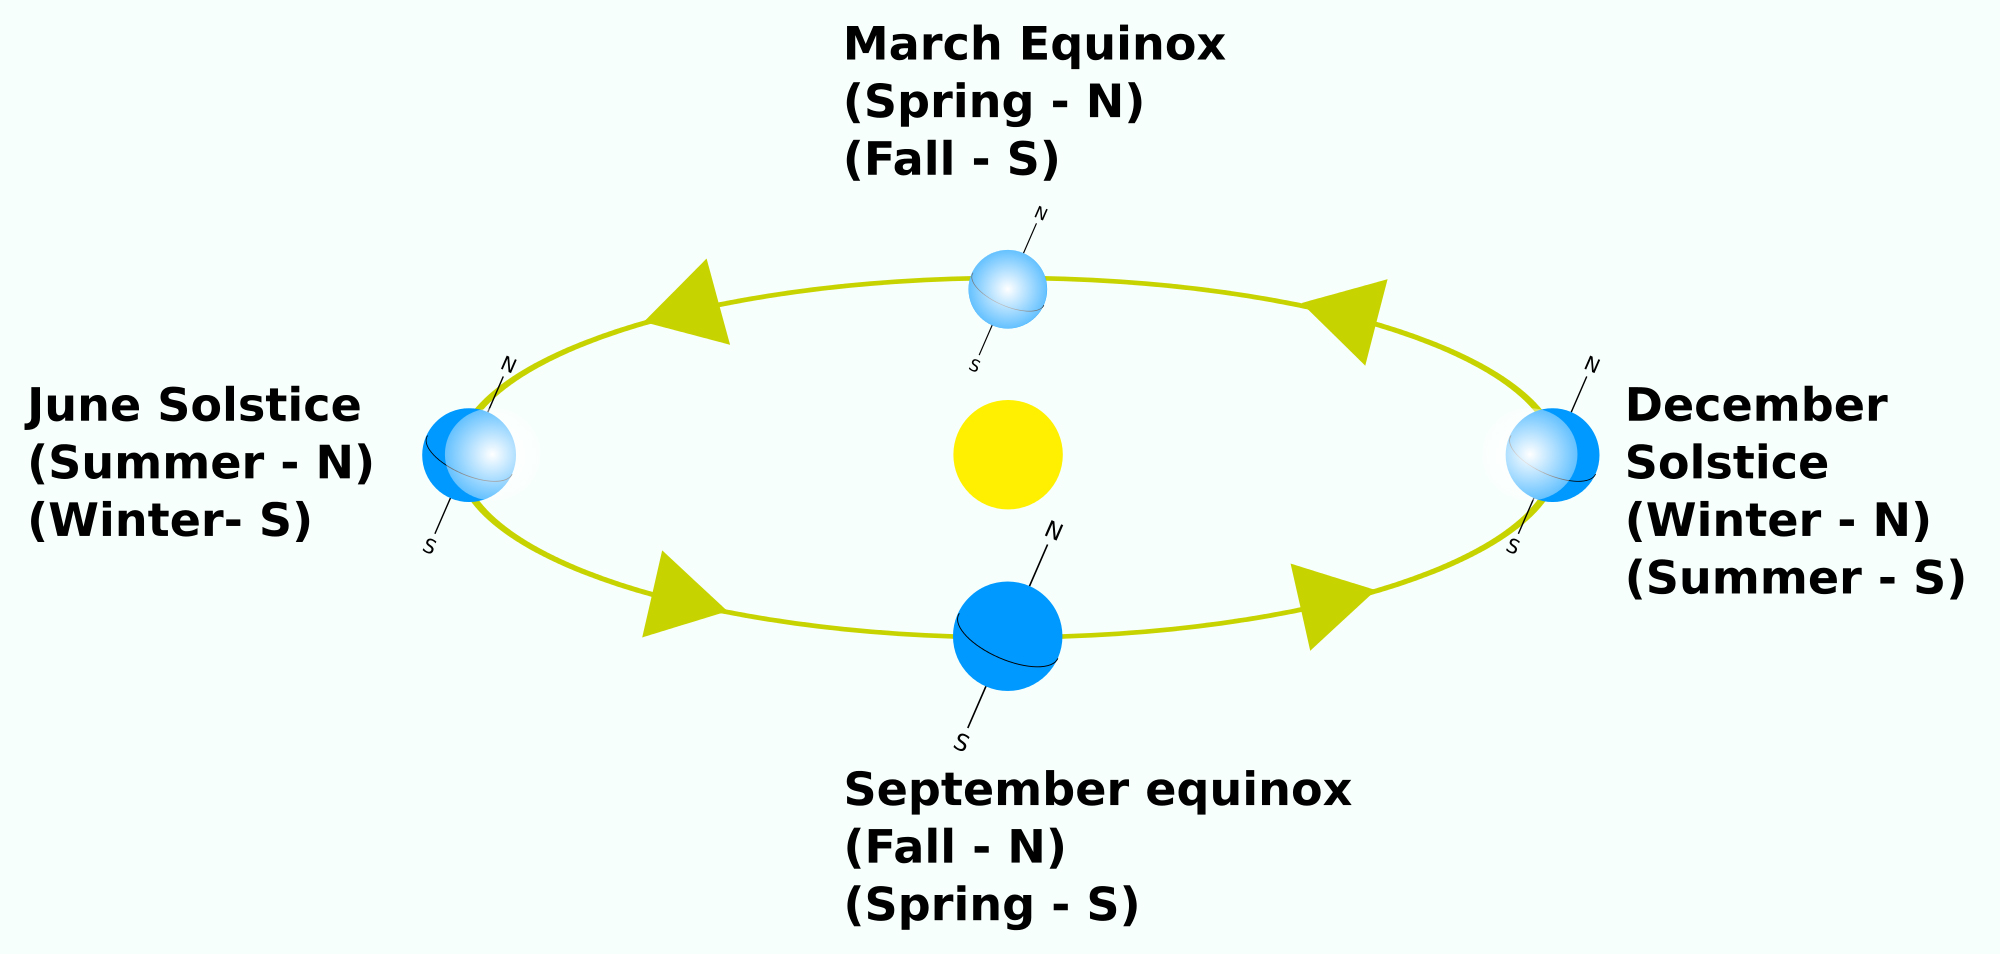 Illustration shows the relative positions and timing of solstice, equinox and seasons in relation to the Earth's orbit around the sun, with equinox falling in the months of March and September while solstice is under June and December.